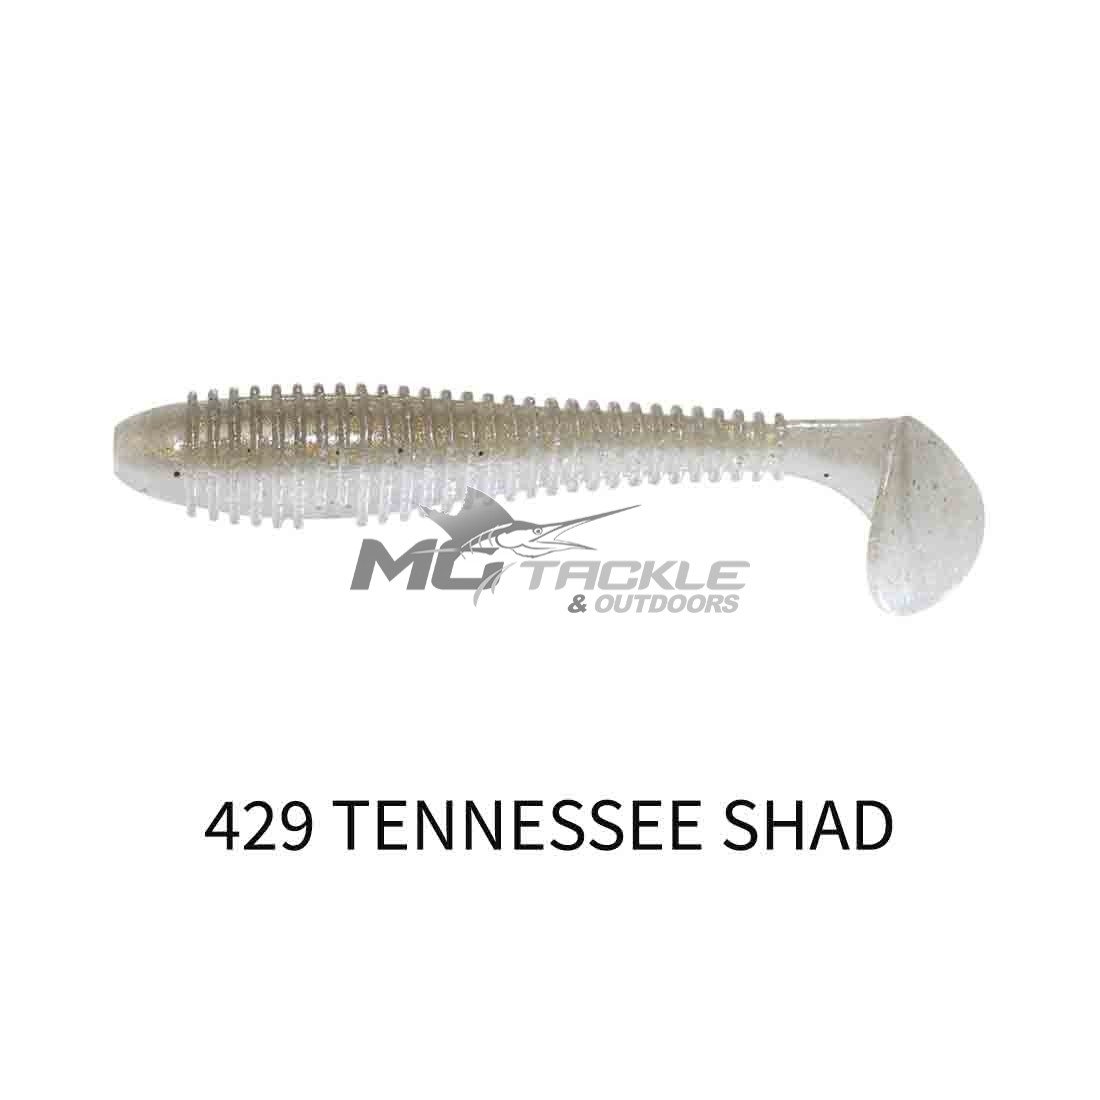 Keitech FAT Swing Impact 3.8 - Tennessee Shad Pro Pack